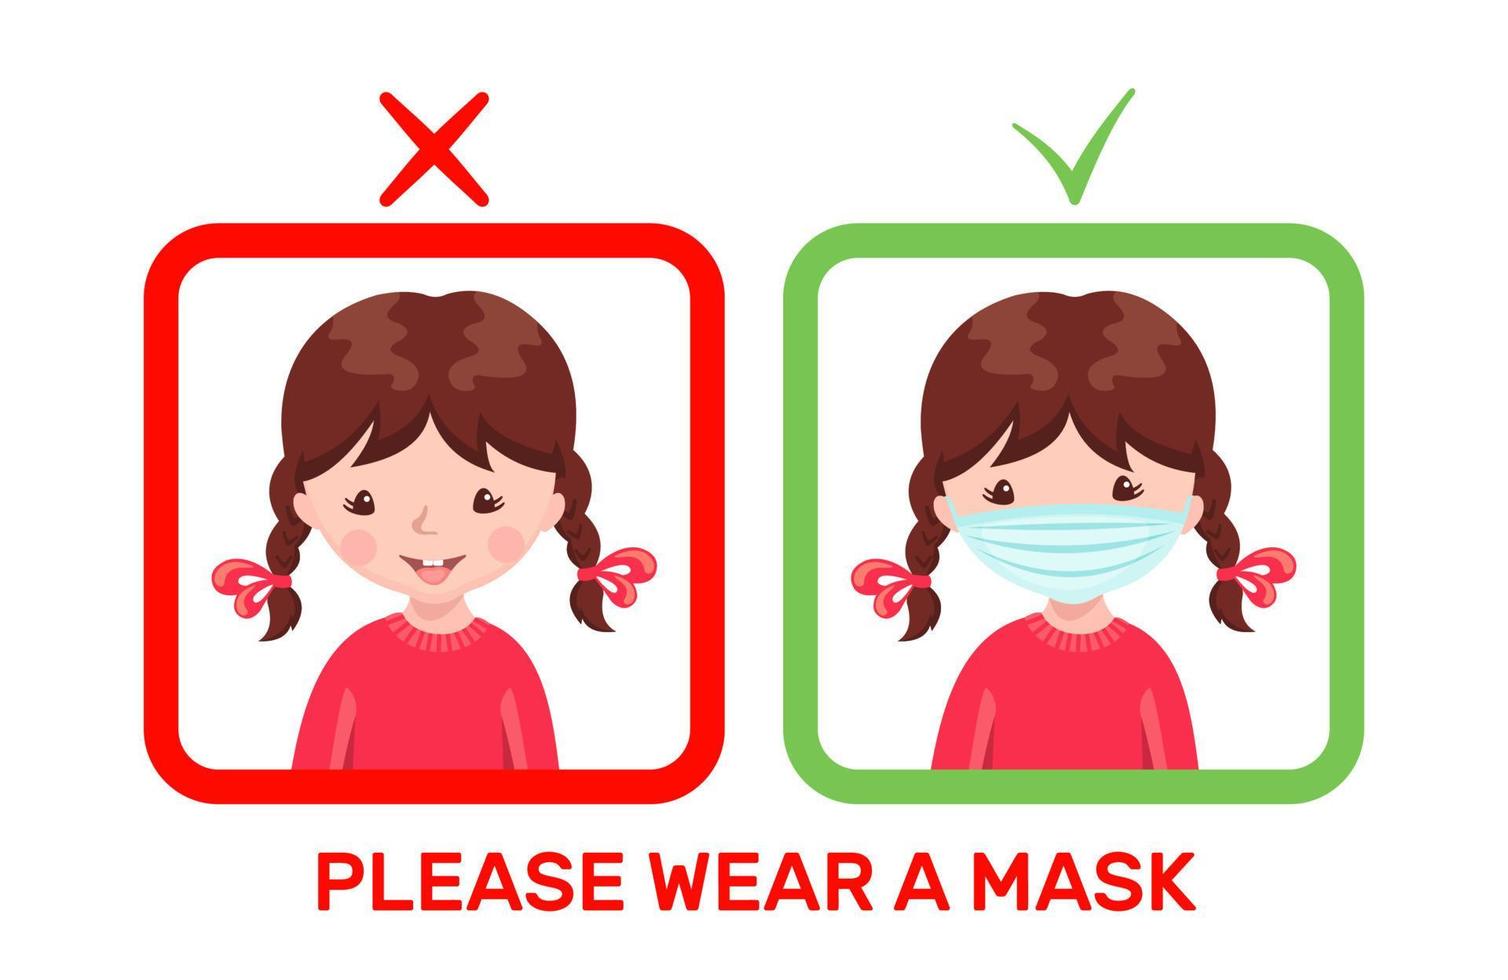 Cute girl with medical mask and without mask in cartoon style isolated on white background. Poster or banner with child in flue mask. Stop epidemic concept. Vector illustration.